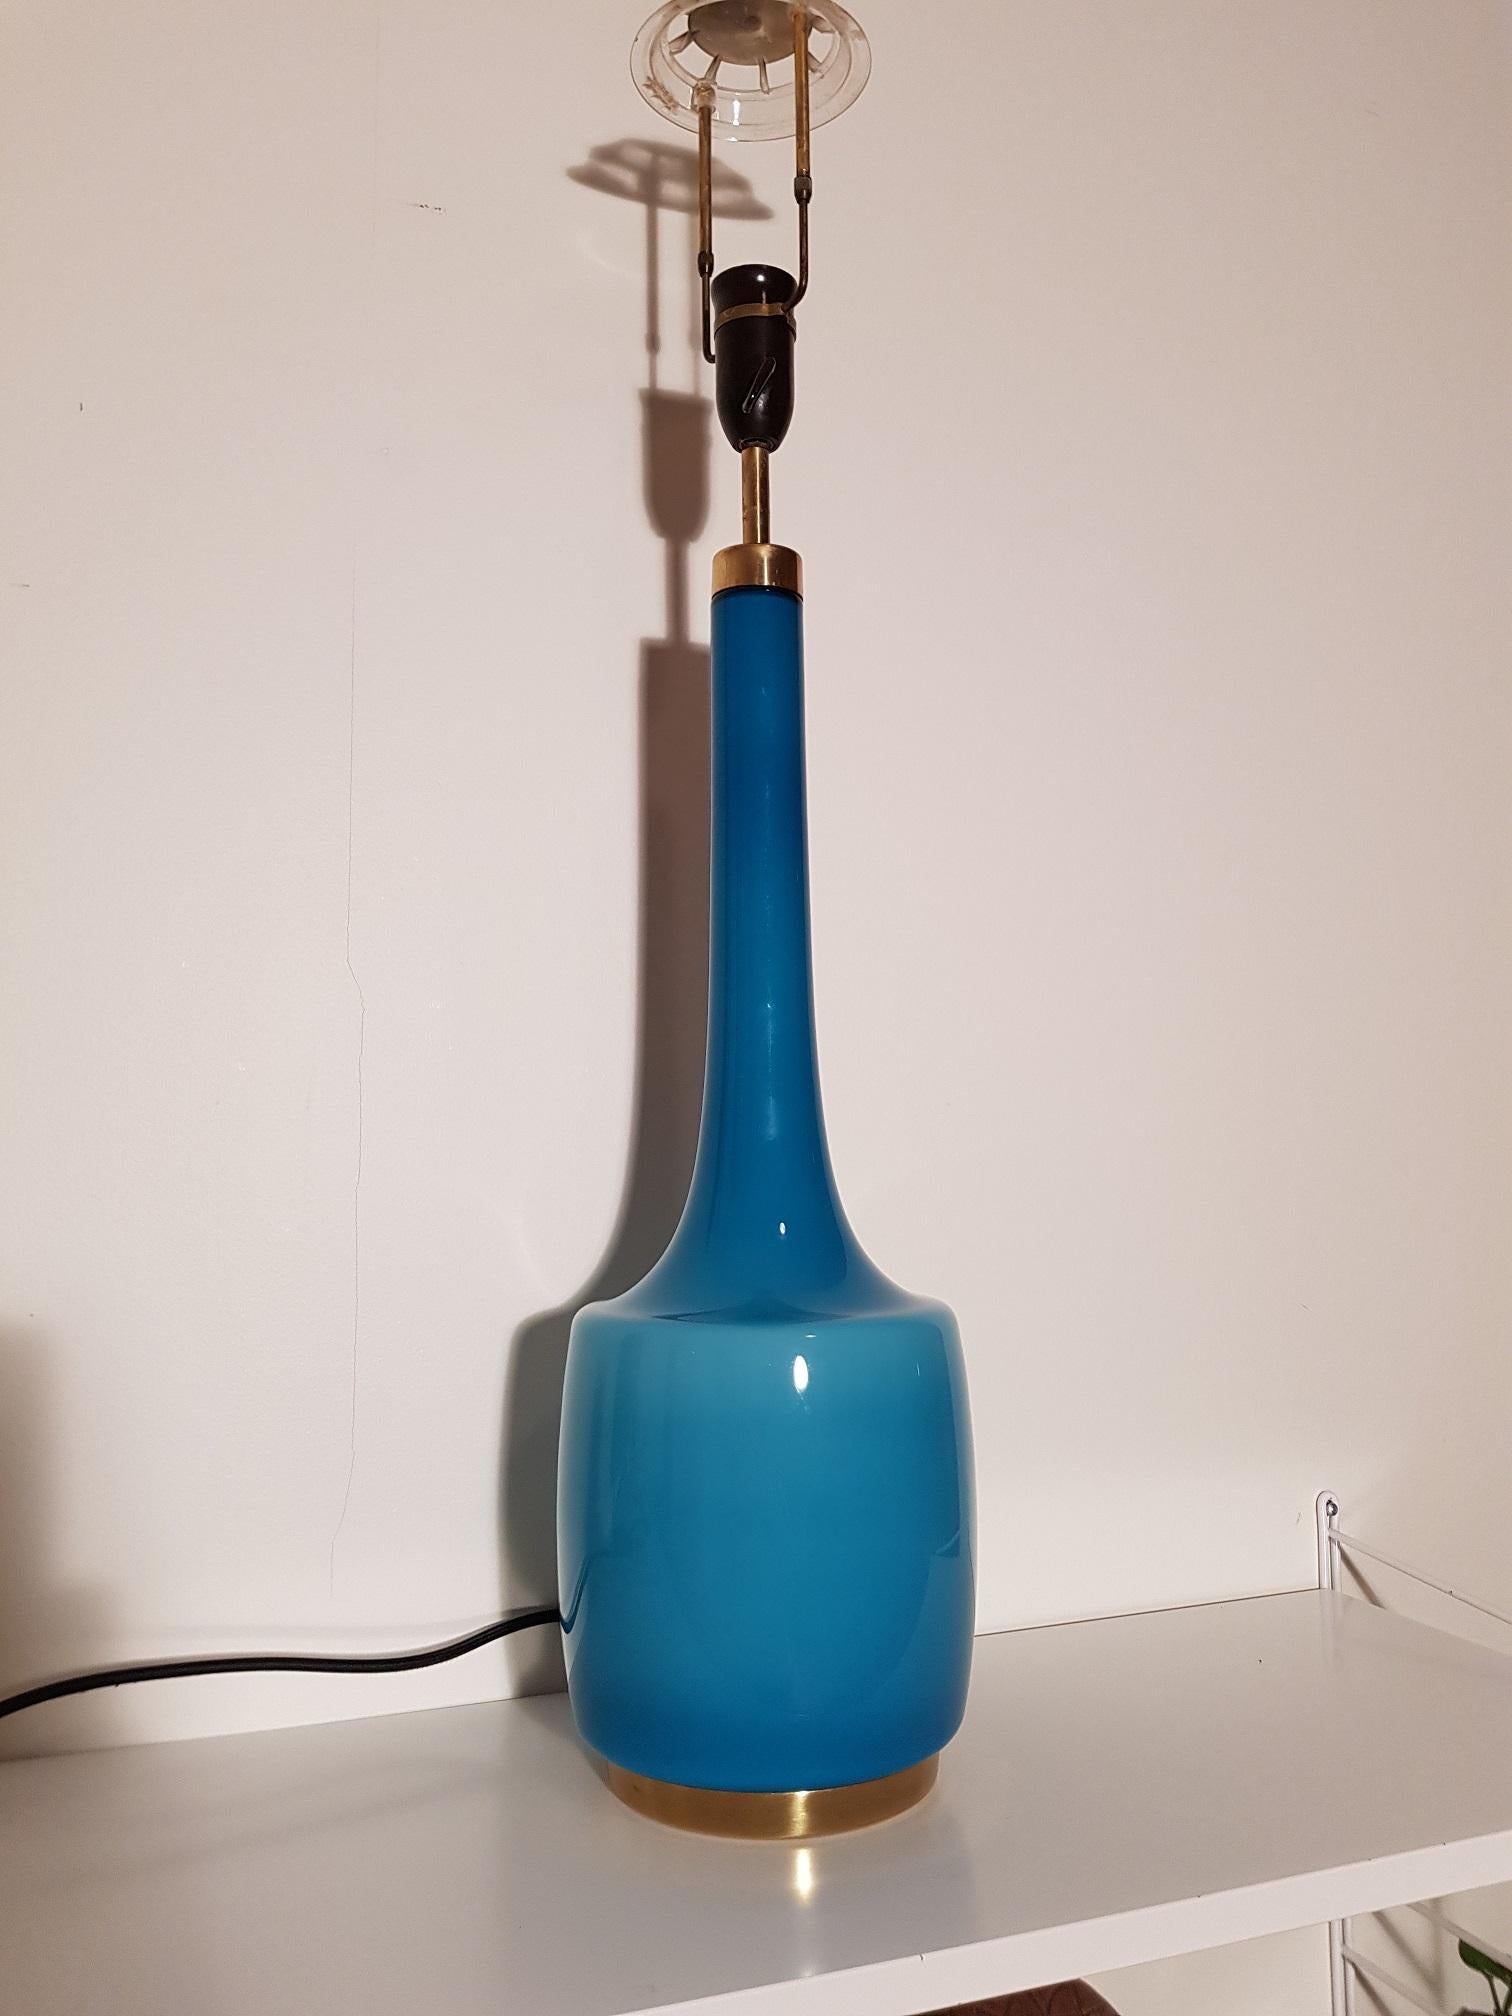 Svend Aage Holm Sorensen Opaline Table Lamp 1960s for Holm Sorensen & Co Denmark In Good Condition For Sale In Limhamn, SE